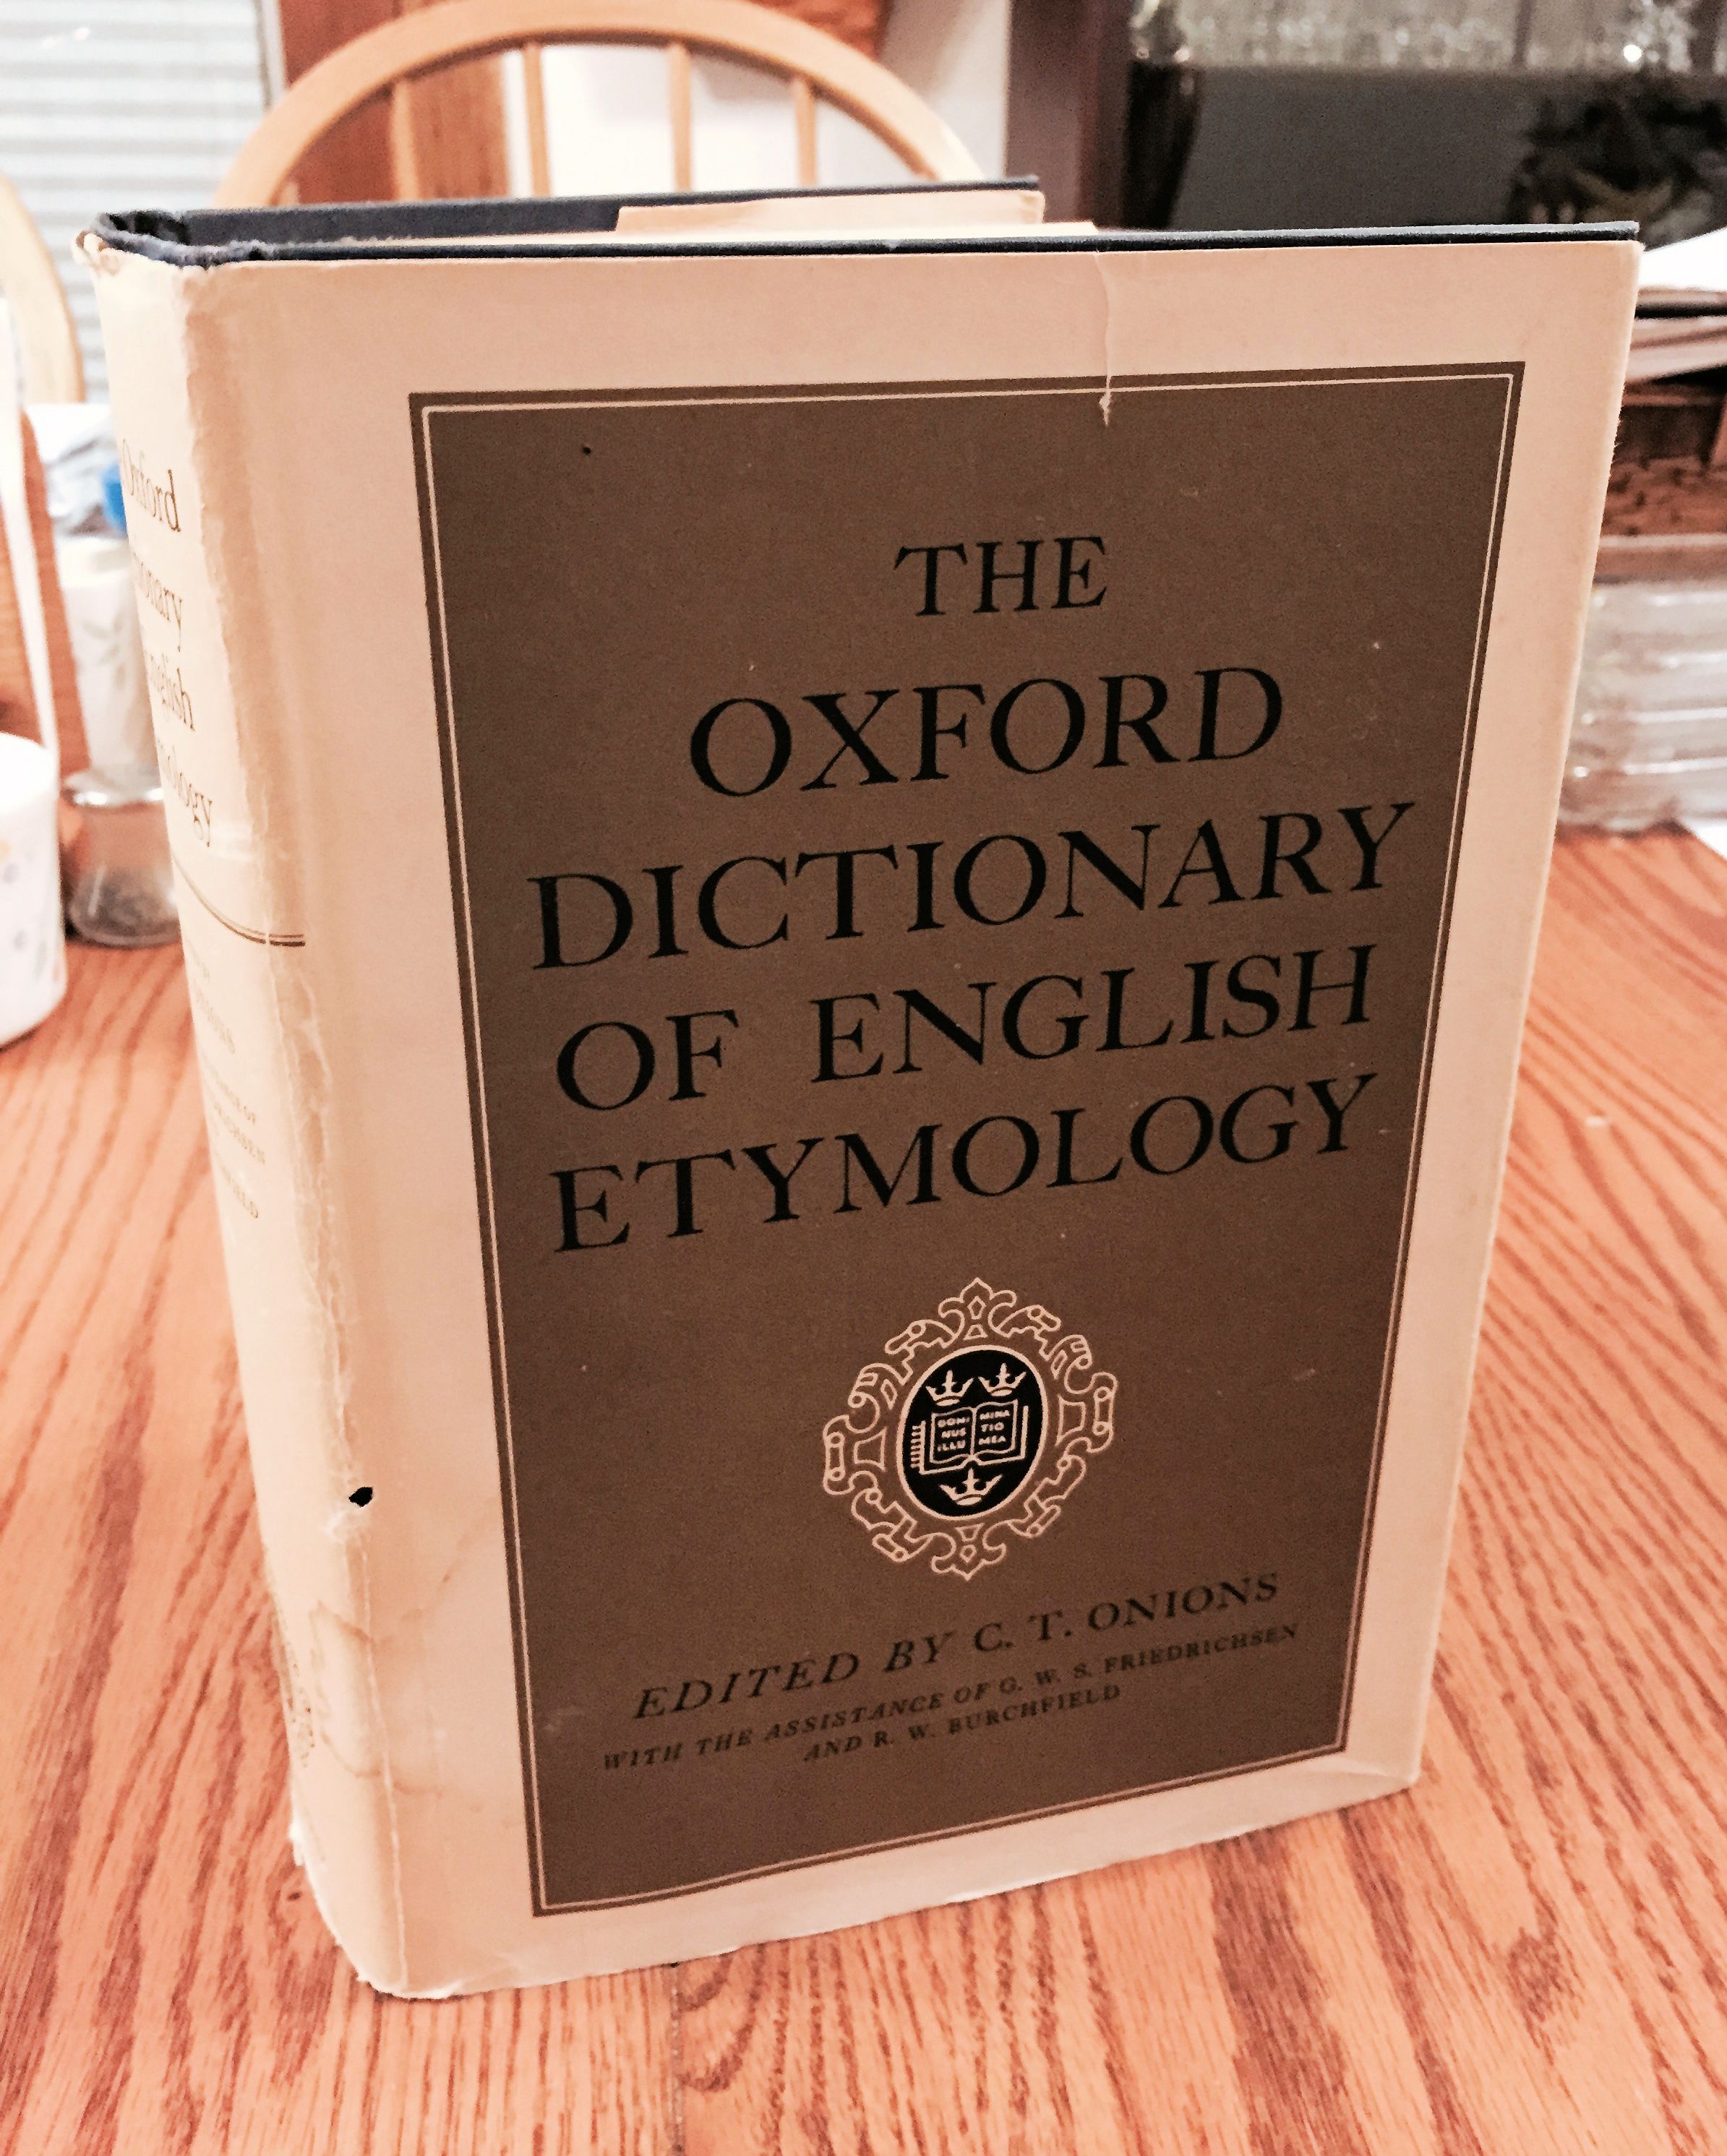 An analytic dictionary of english etymology